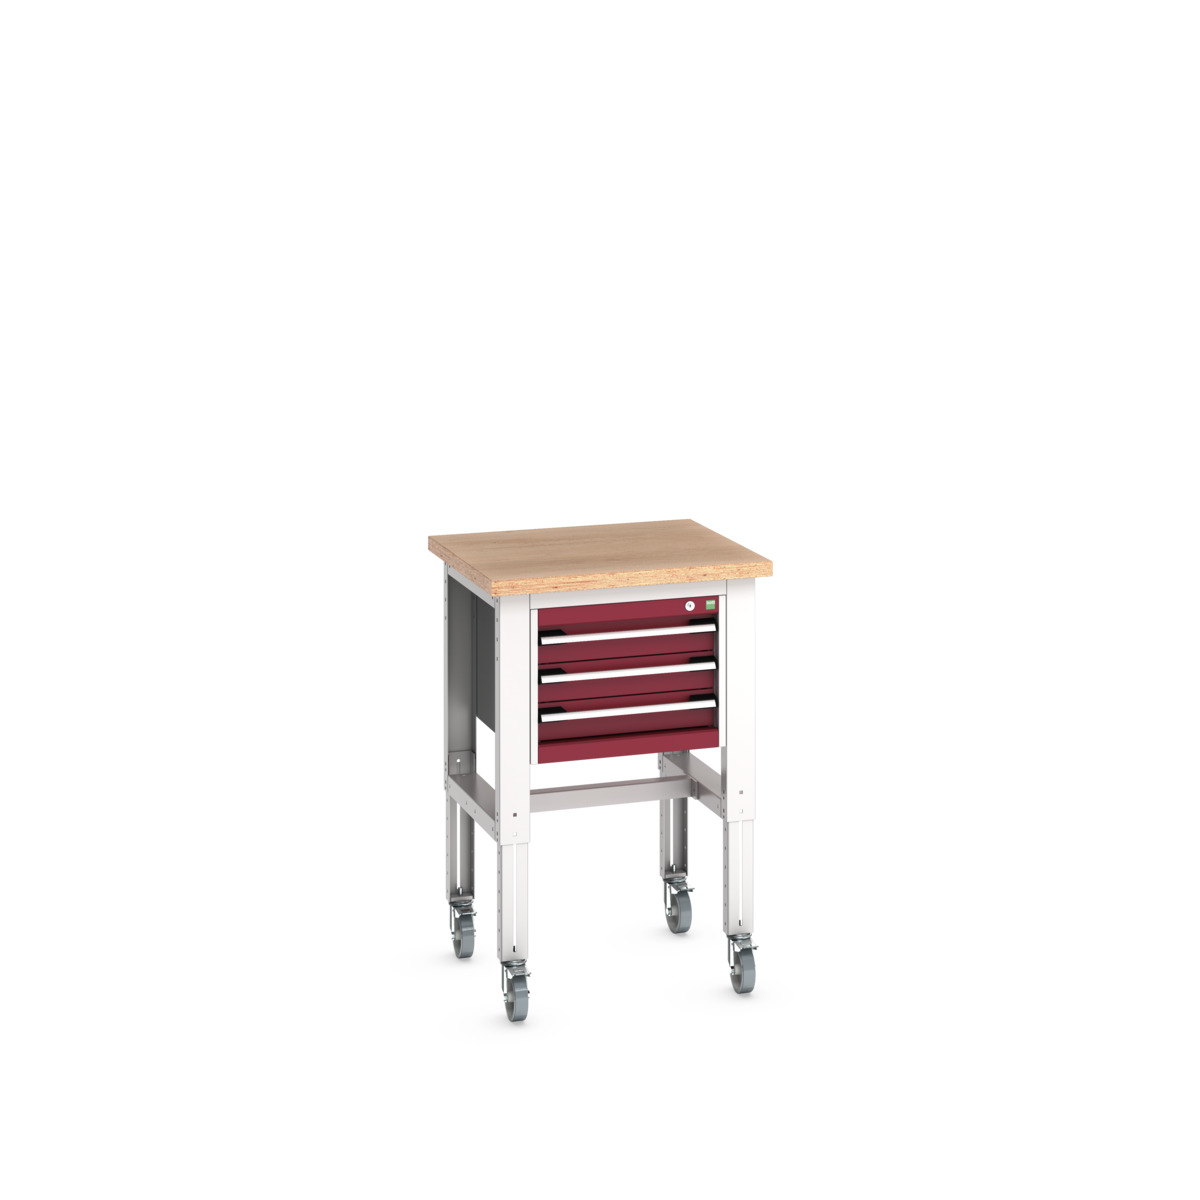 41003527.24V - cubio mobile bench adj height (mpx)